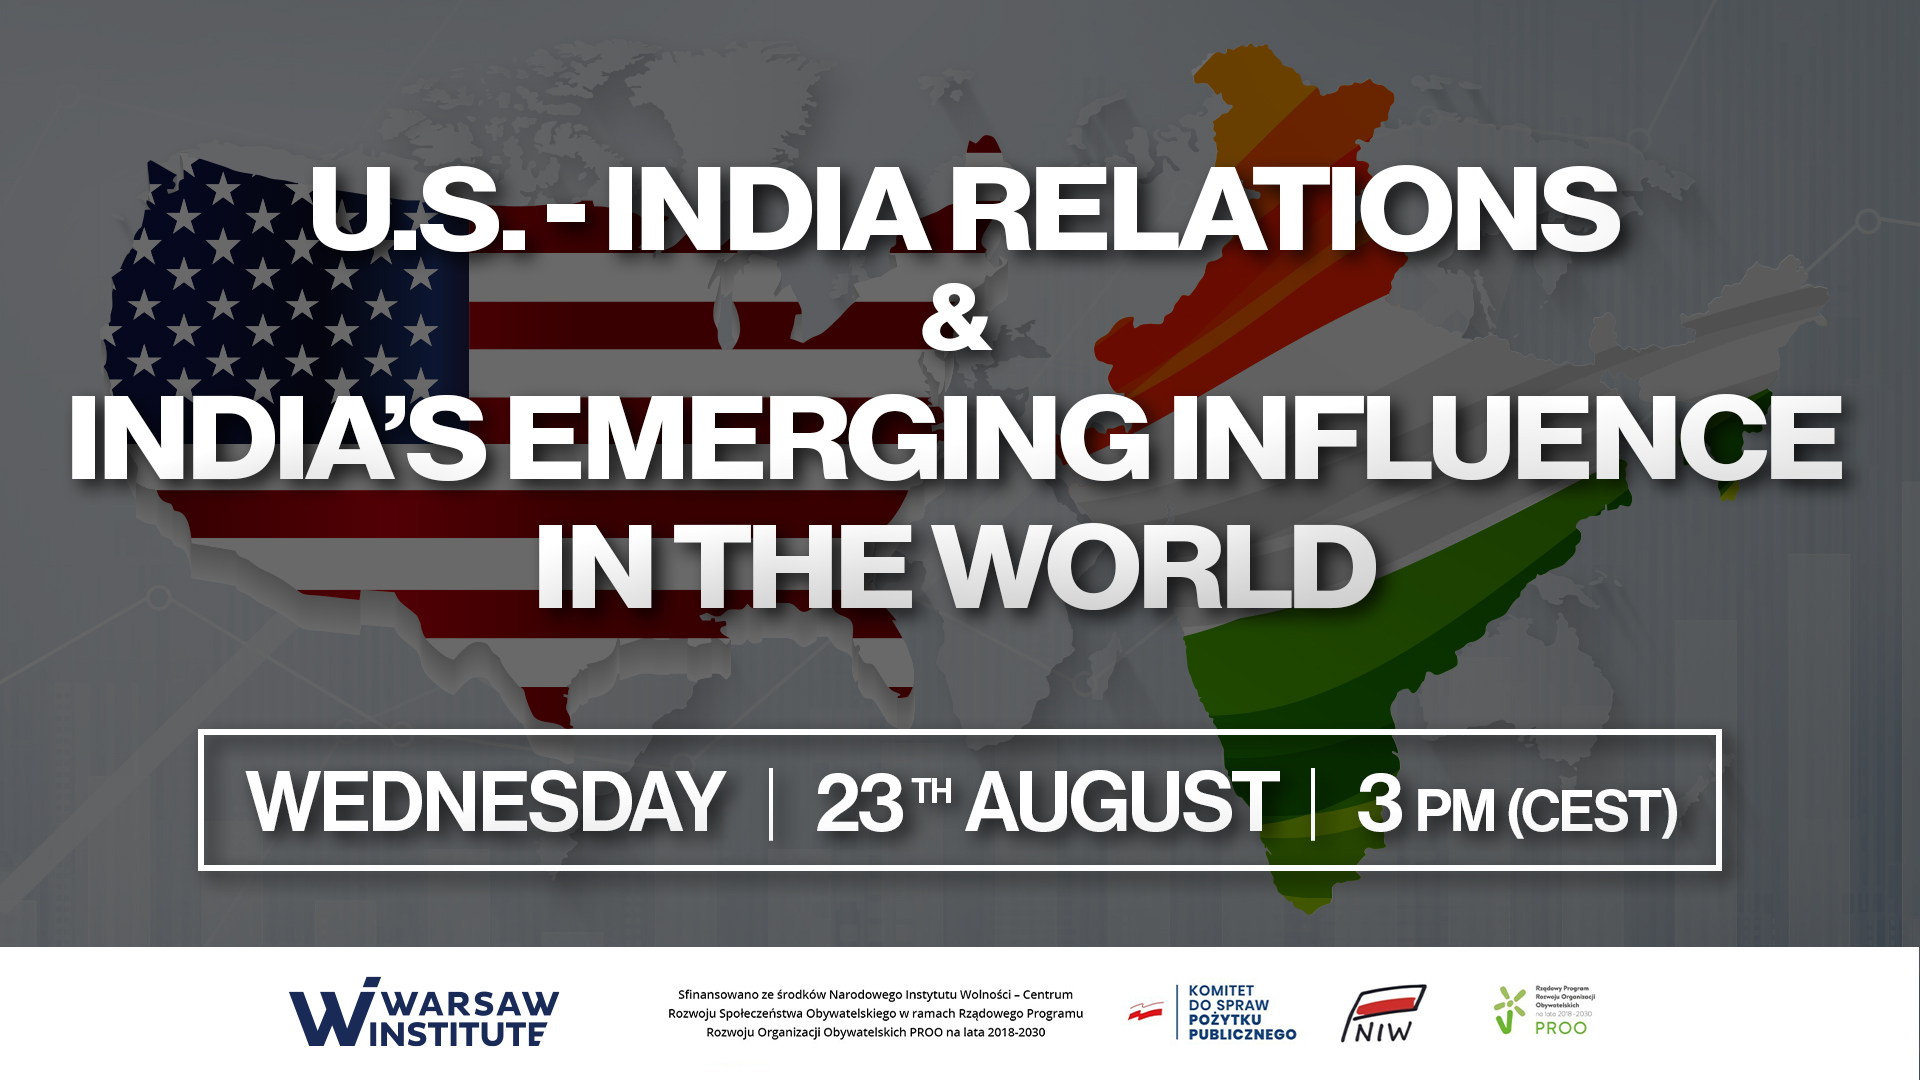 U.S. – India Relations & India’s Emerging Influence in the World